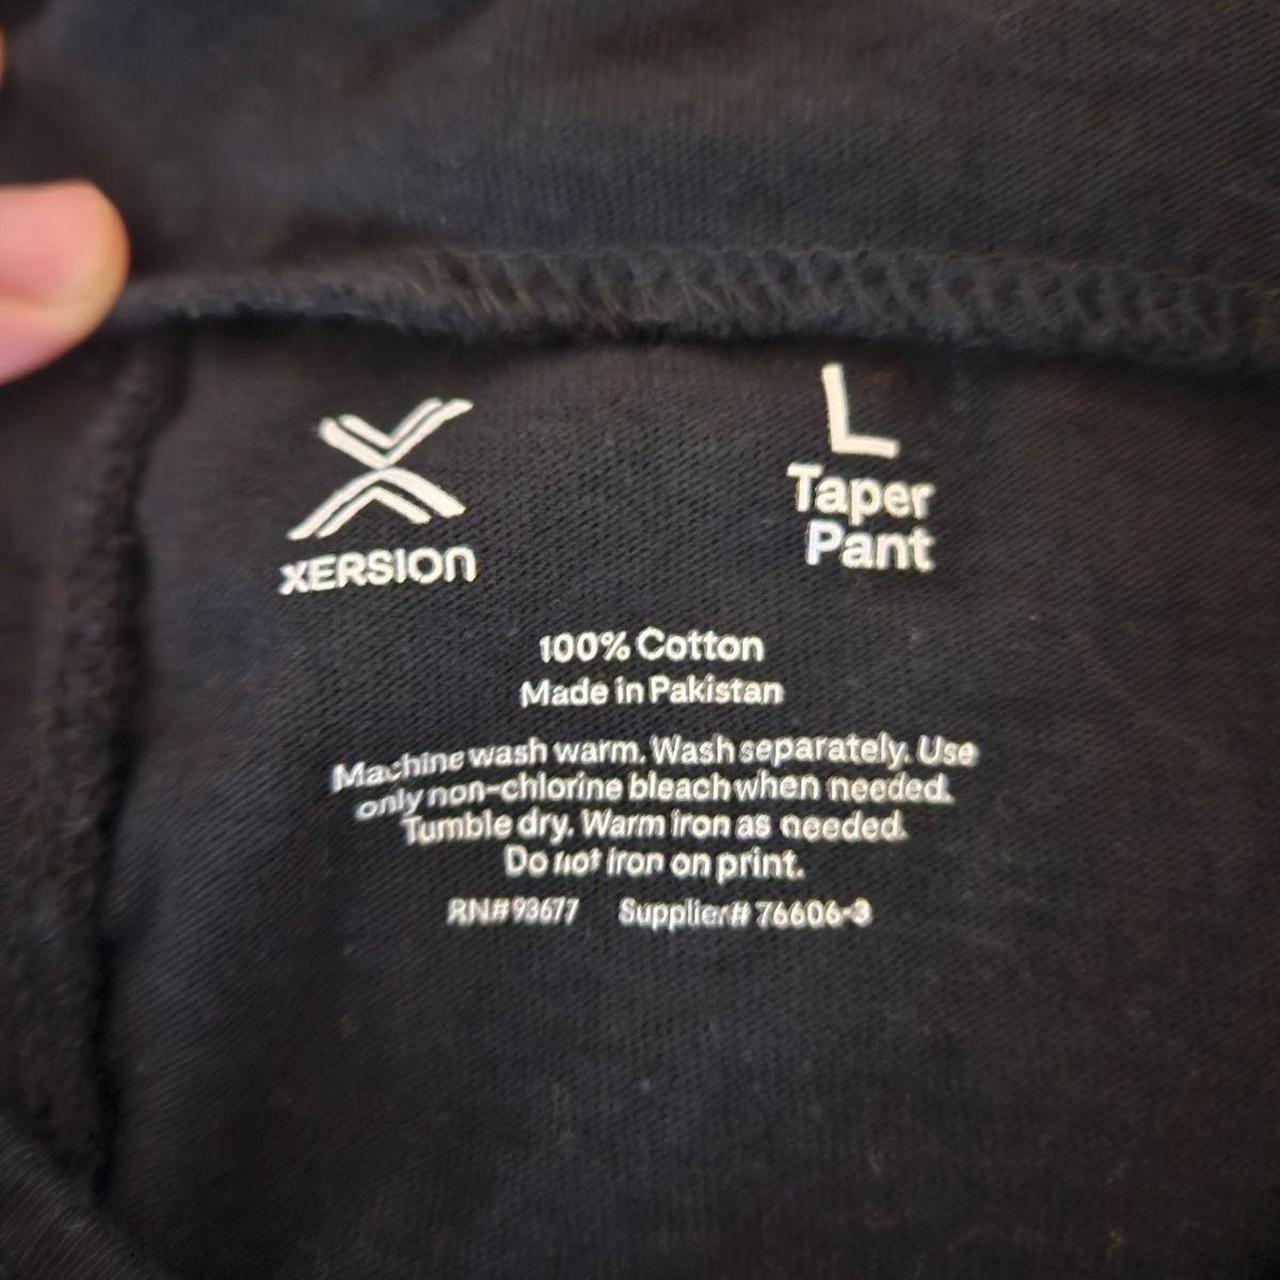 Xersion Taper Sweatpants Large Like New Worn one time